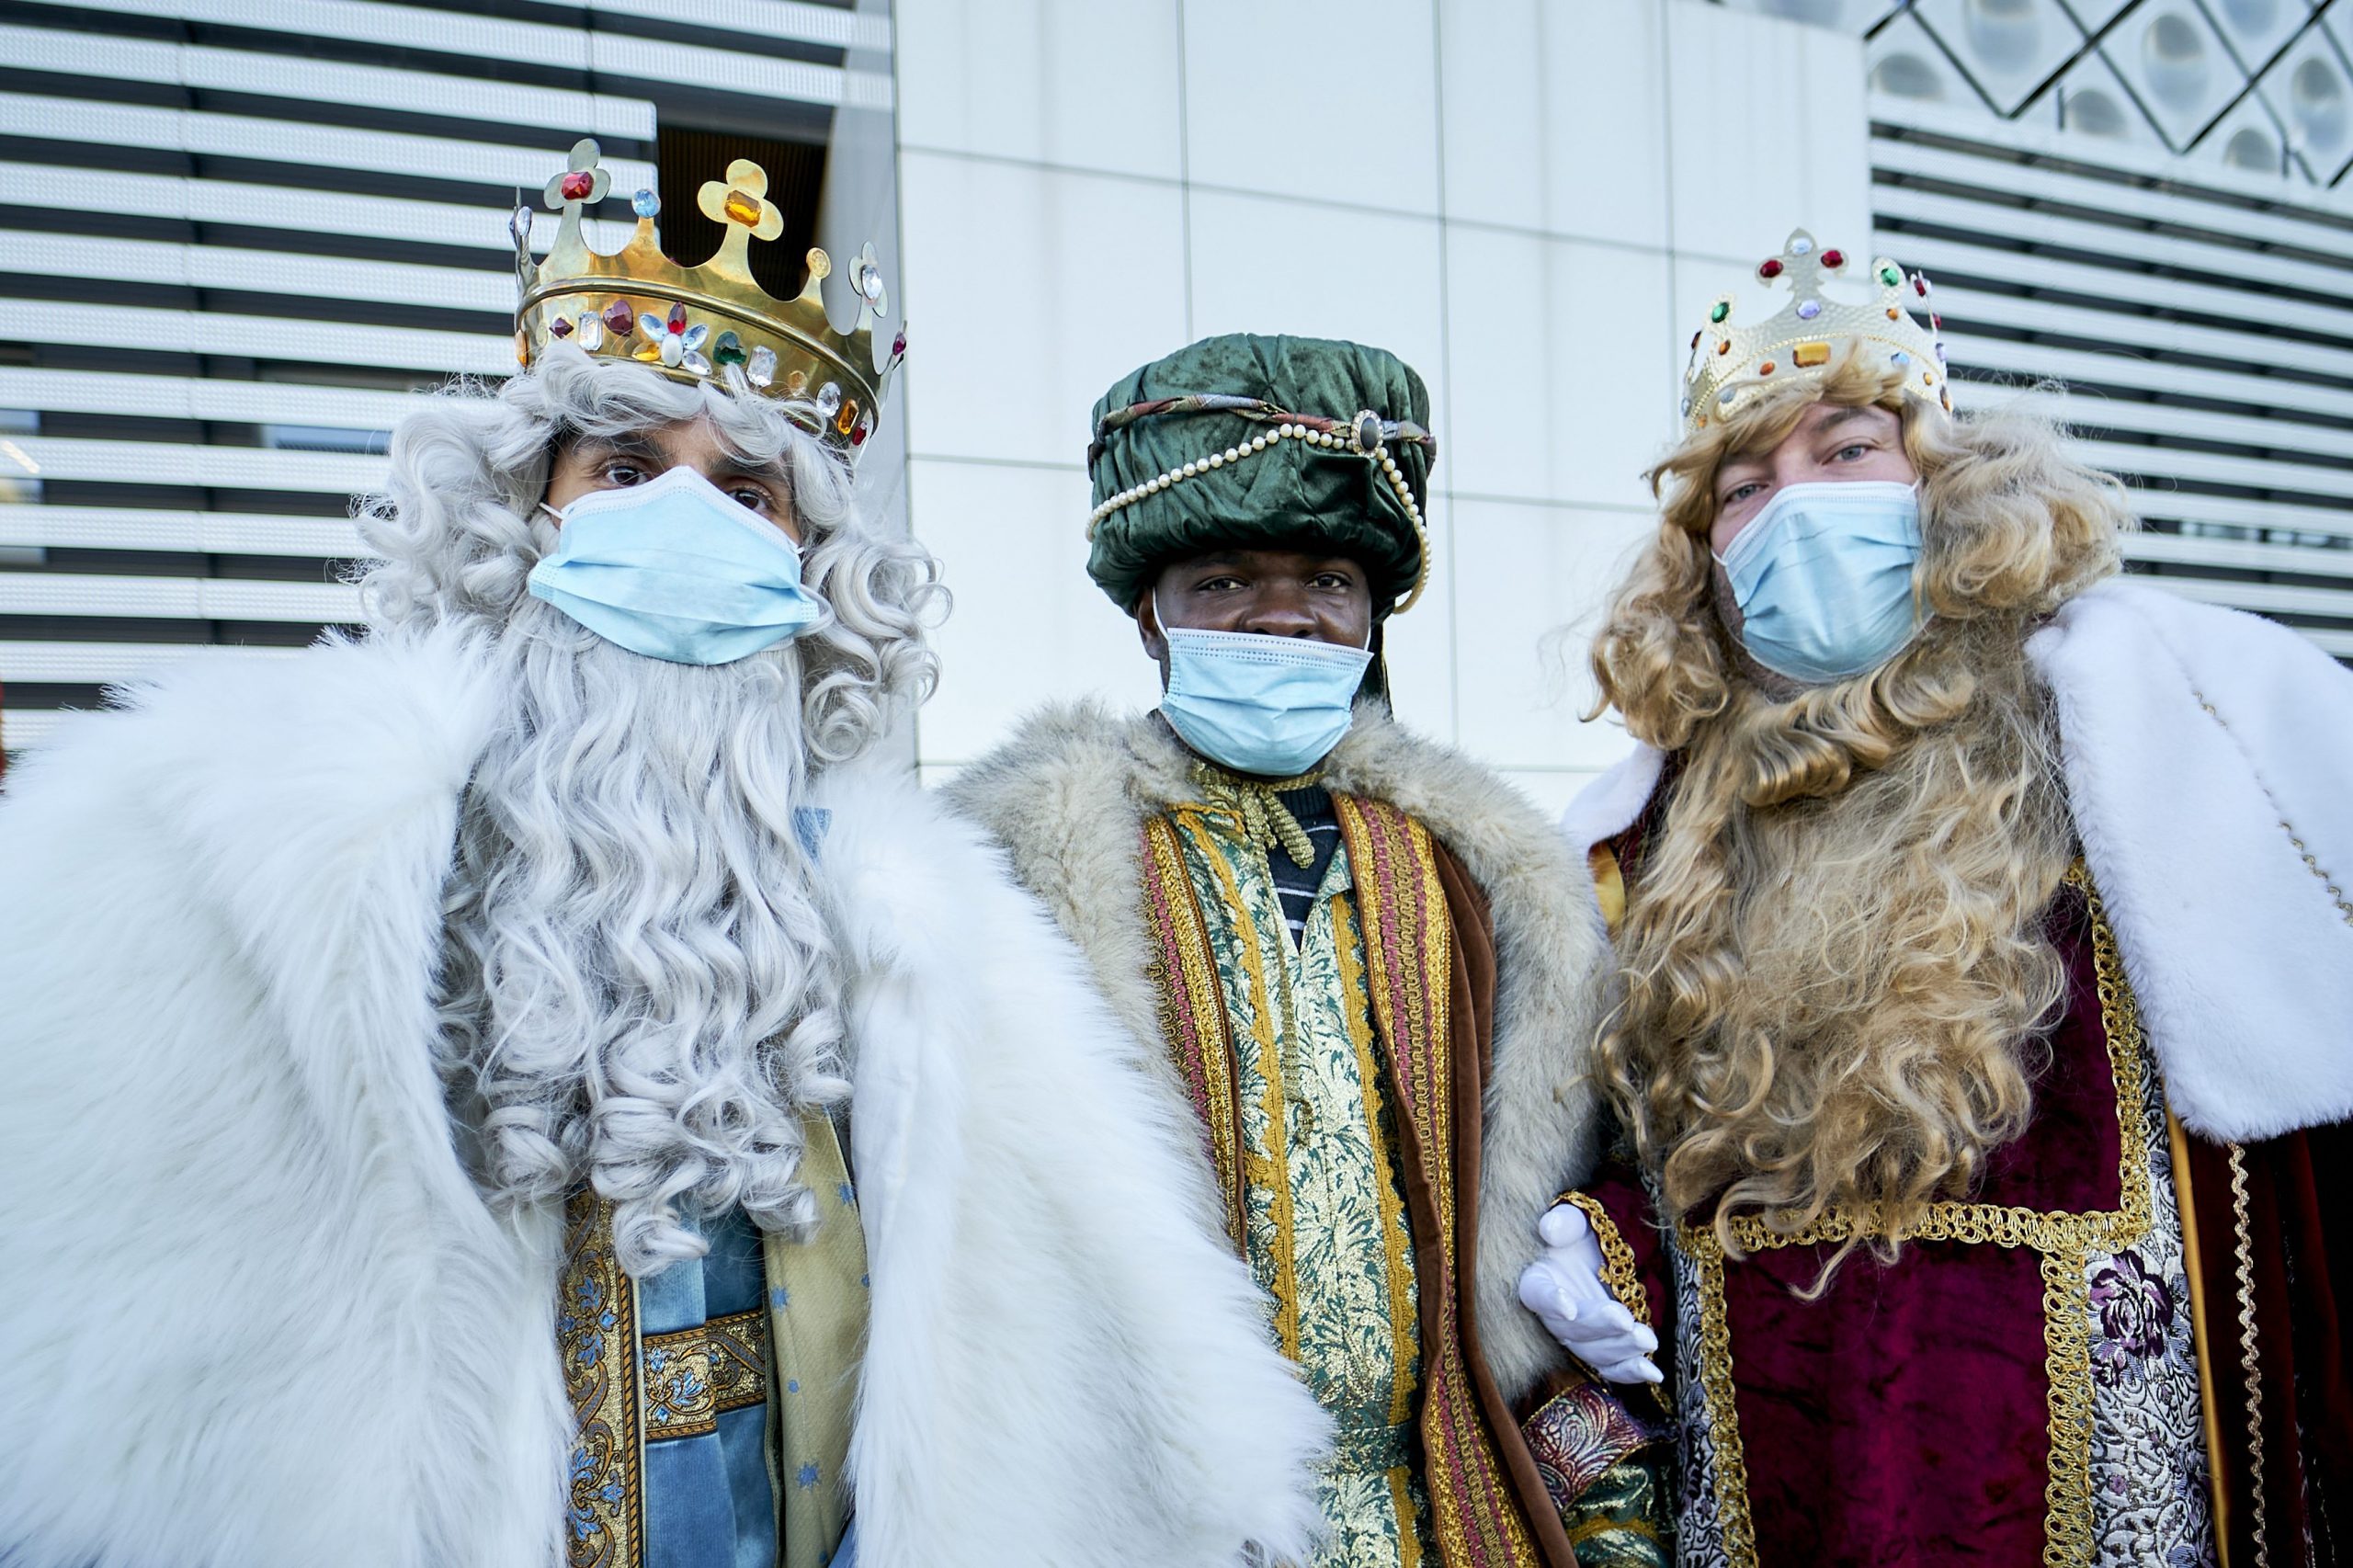 The Three Wise Men looked somewhat different this year...